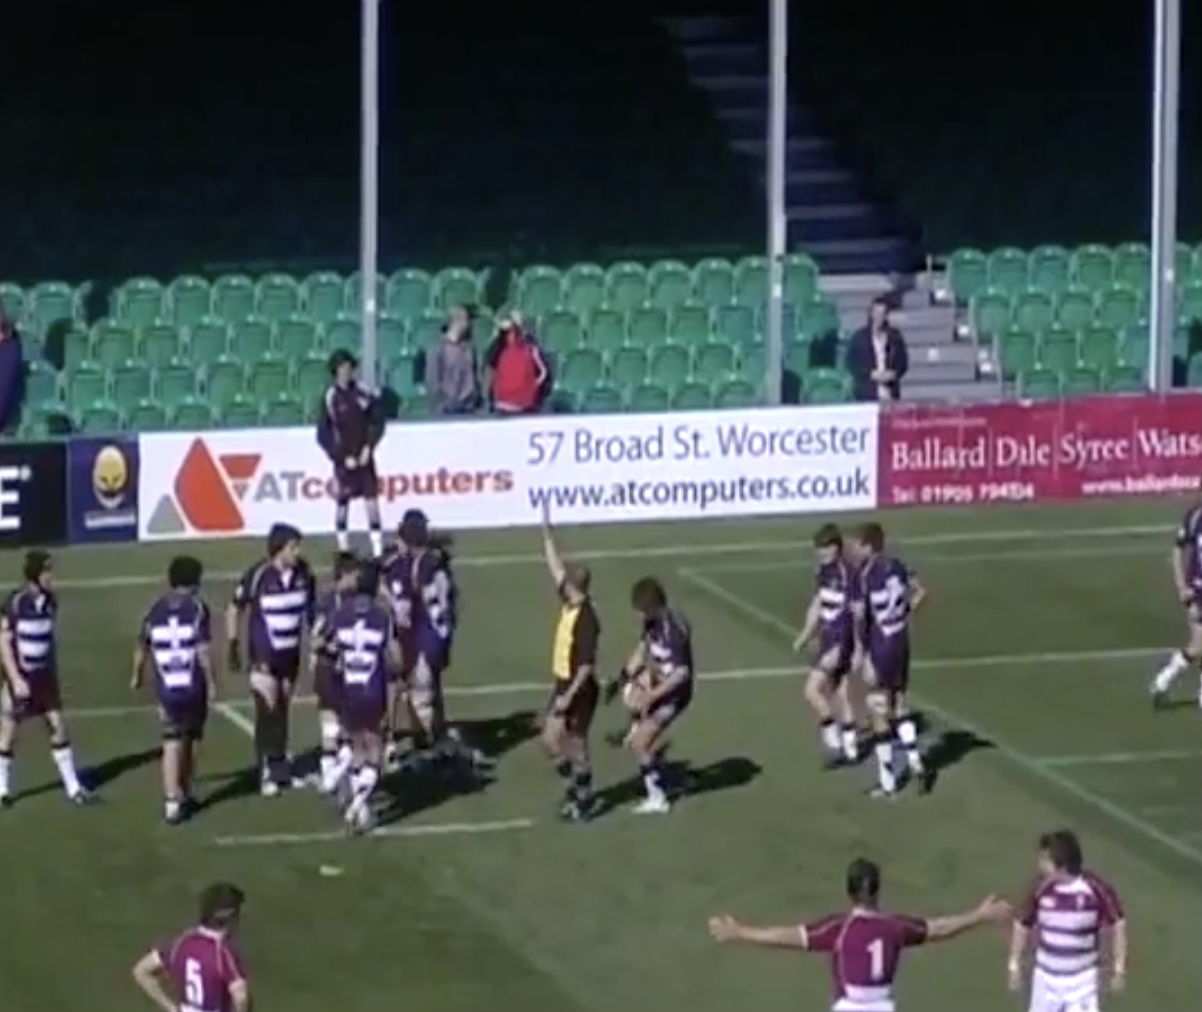 VIDEO: Schoolboy side turn into a 90's French team with nauseating end to end filth